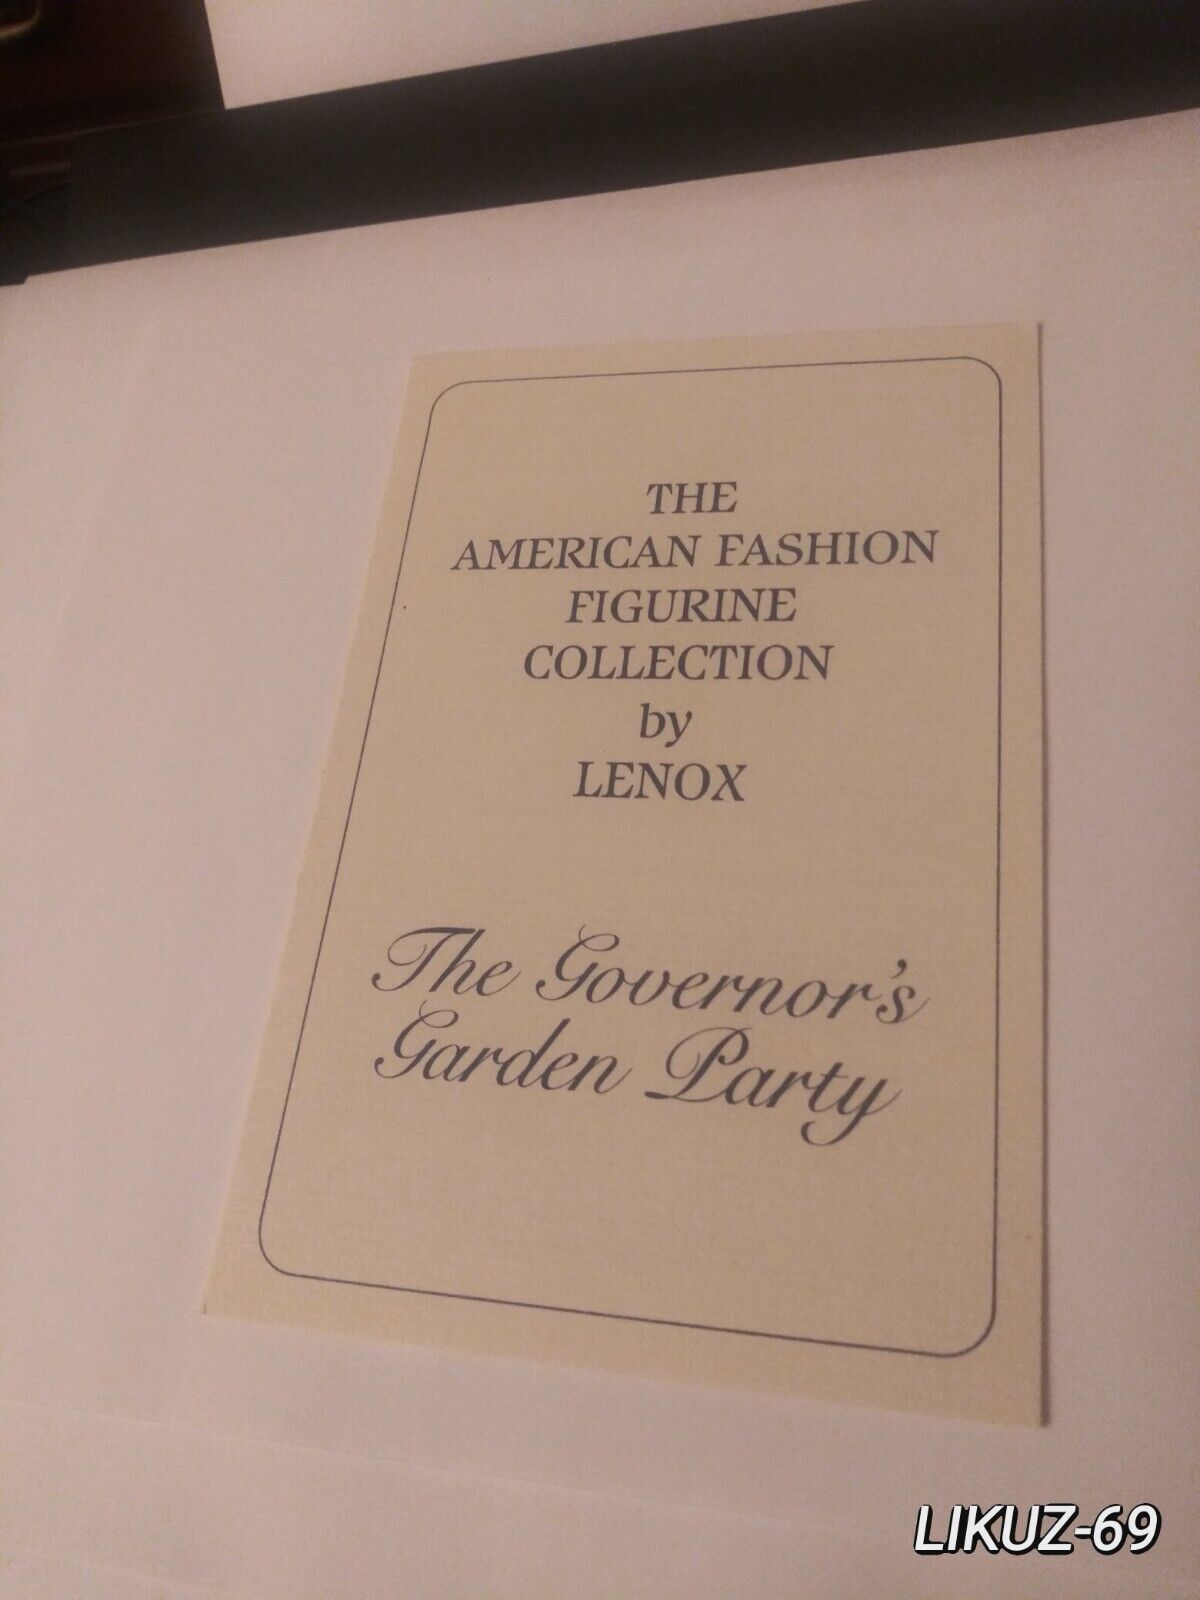 COA for LENOX The Governor\'s Garden Party - American Fashion Figurine Collection